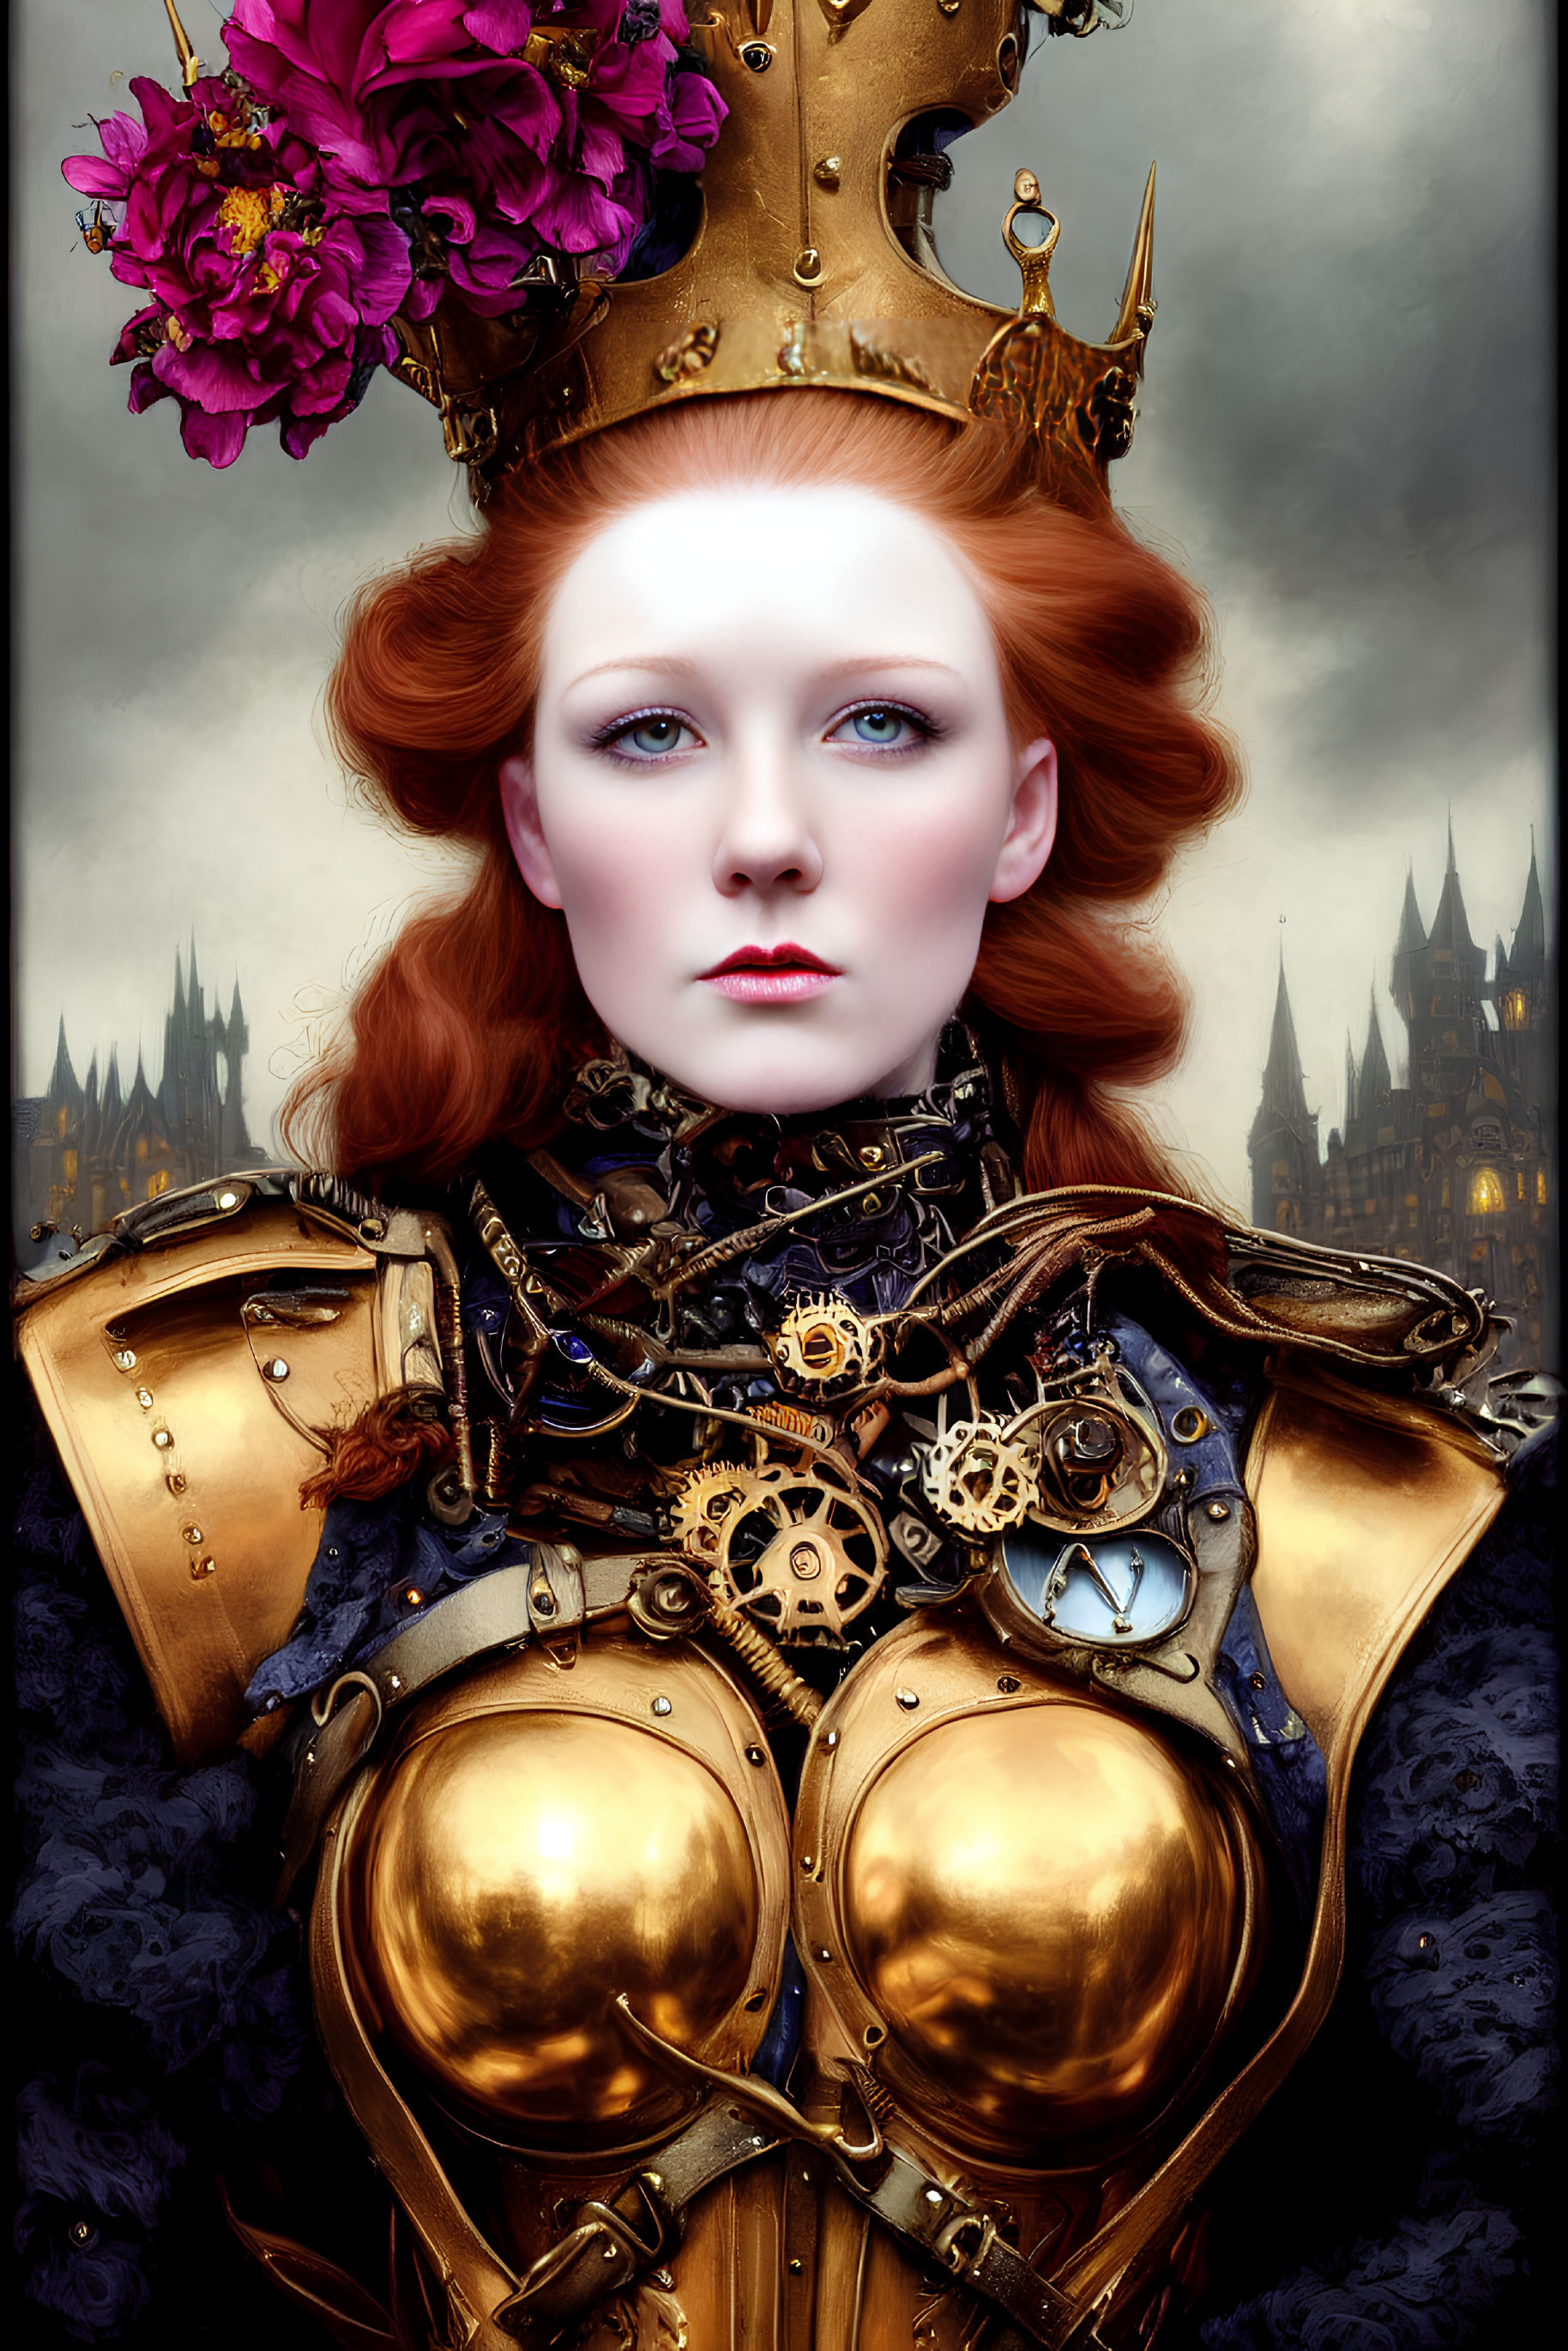 Regal figure with red hair and crown in steampunk armor against gothic backdrop